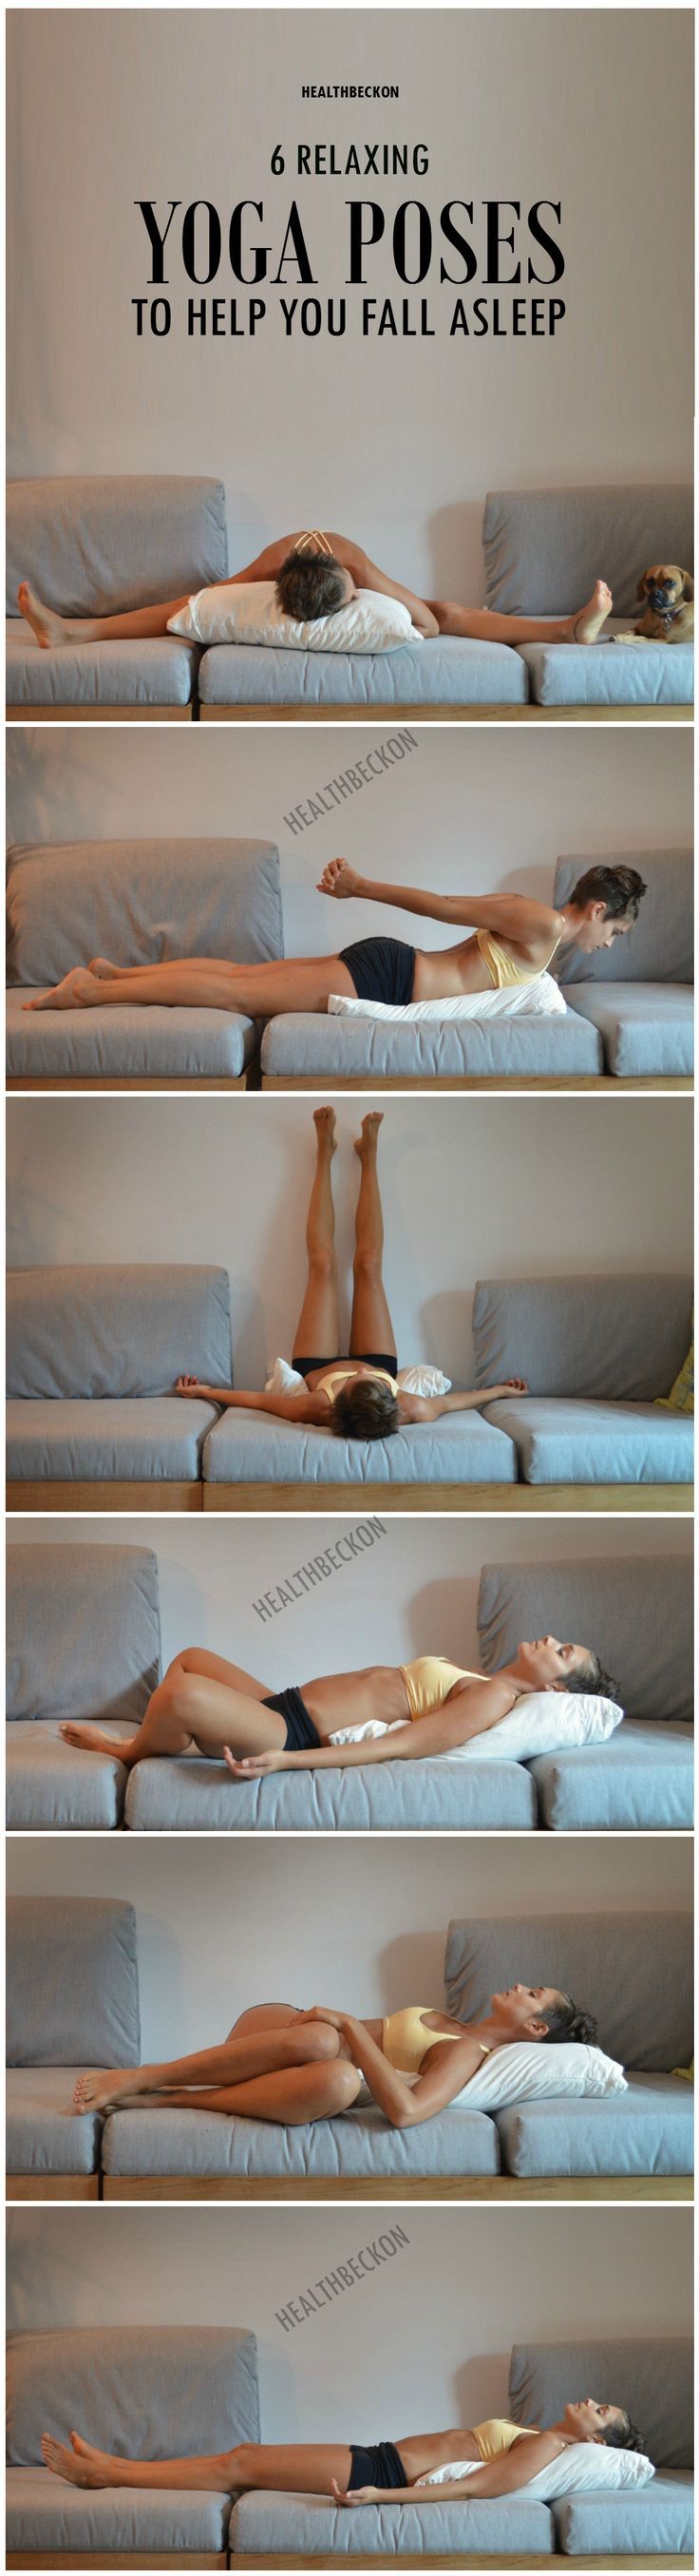 6 Relaxing Yoga Poses To Help You Fall Asleep: These #Yoga postures can work for...